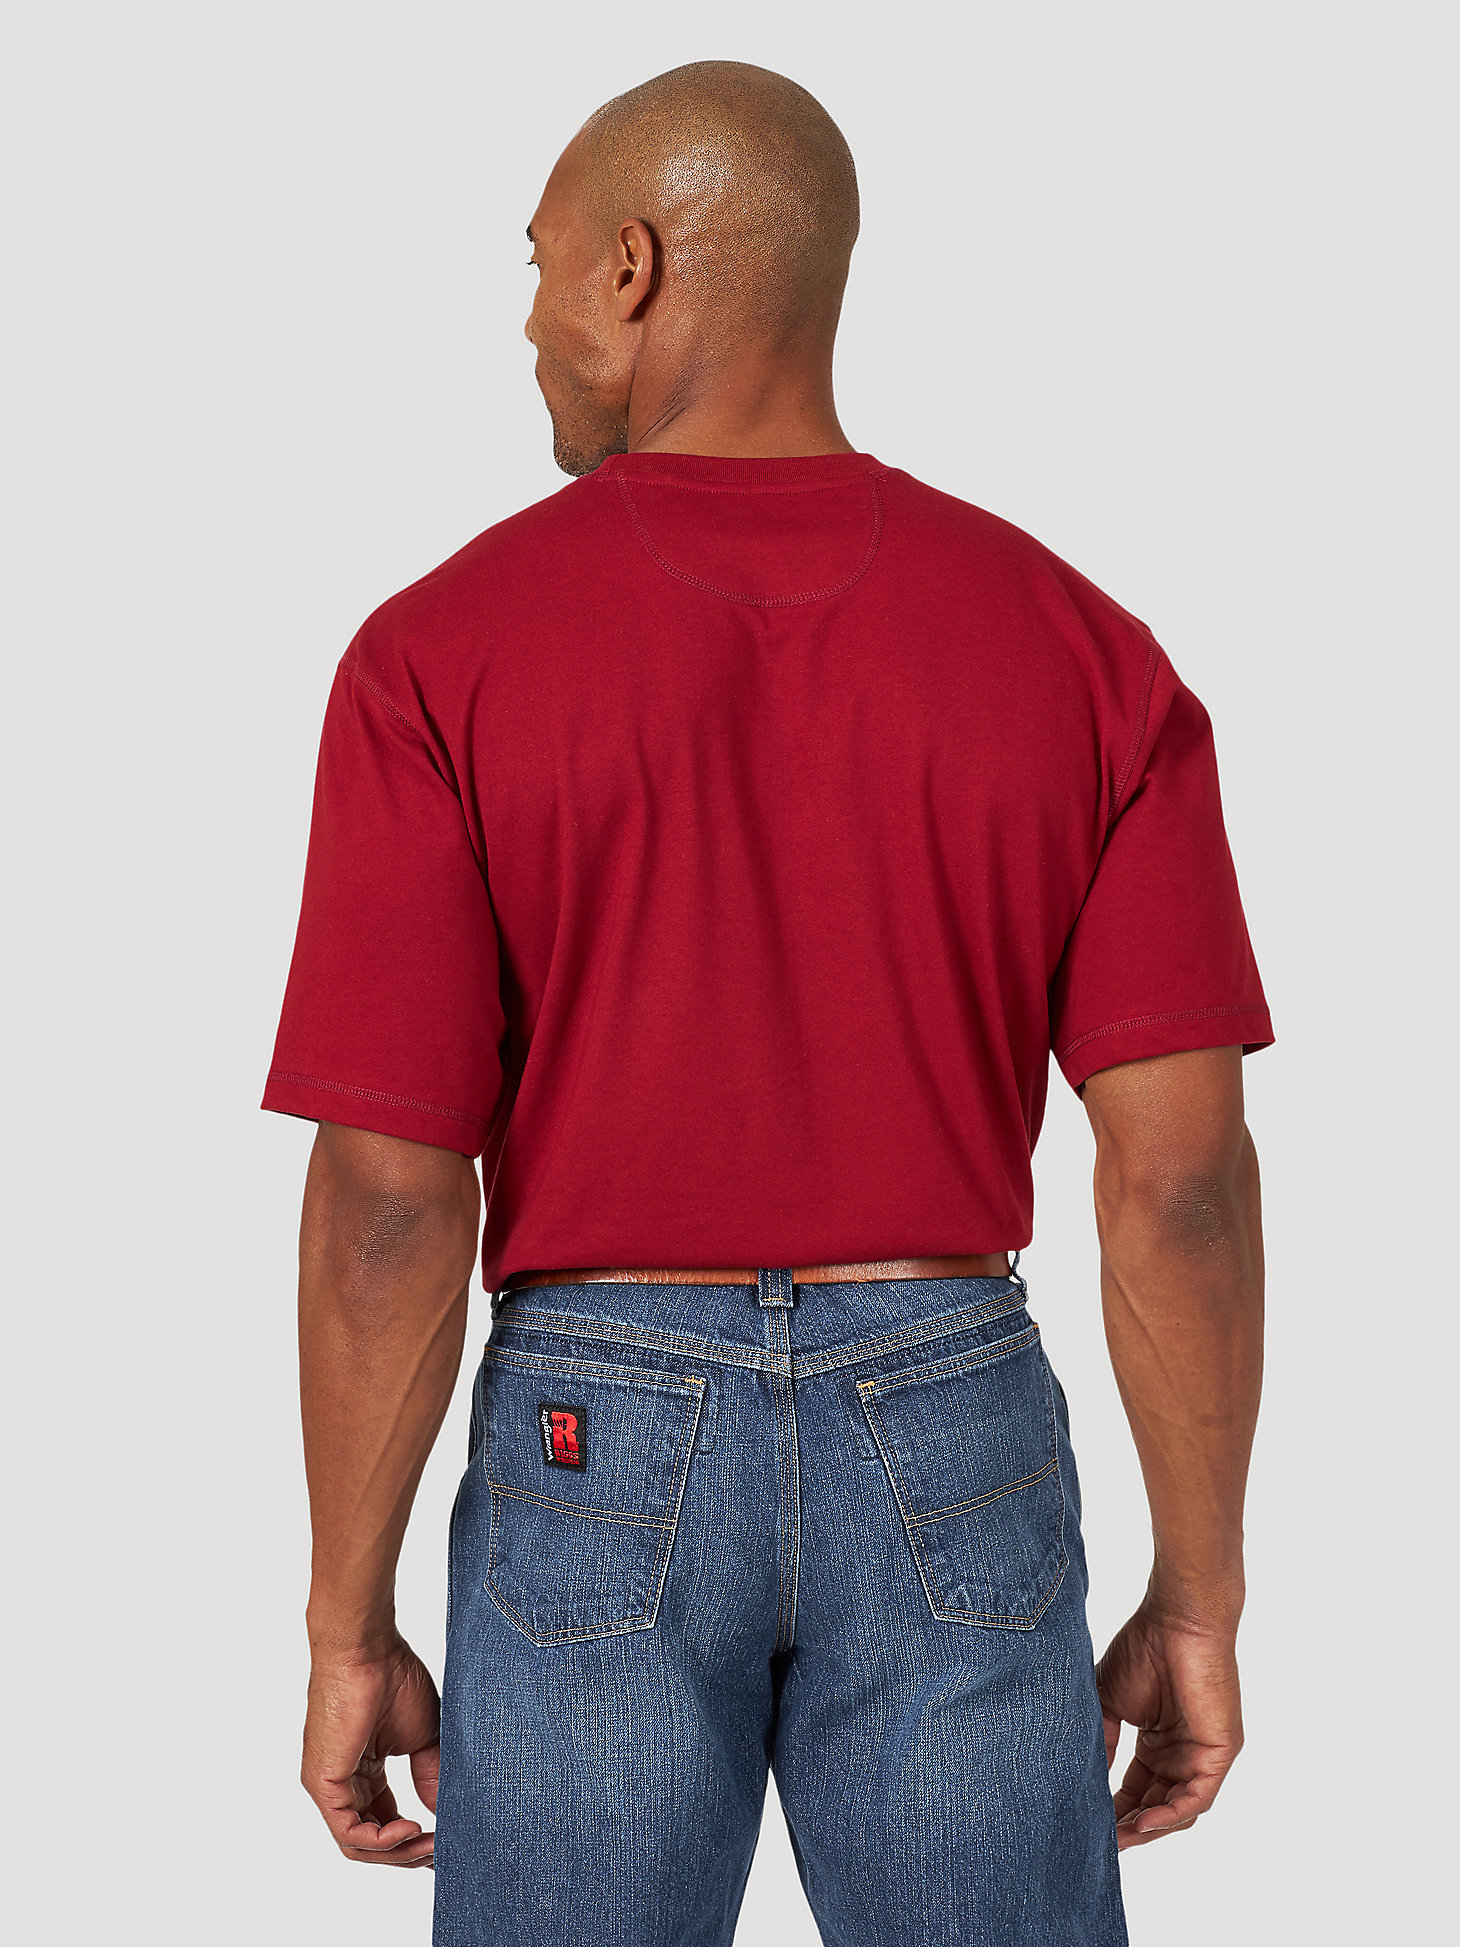 Wrangler® RIGGS Workwear® Short Sleeve 1 Pocket Performance T-Shirt in Currant Red alternative view 1